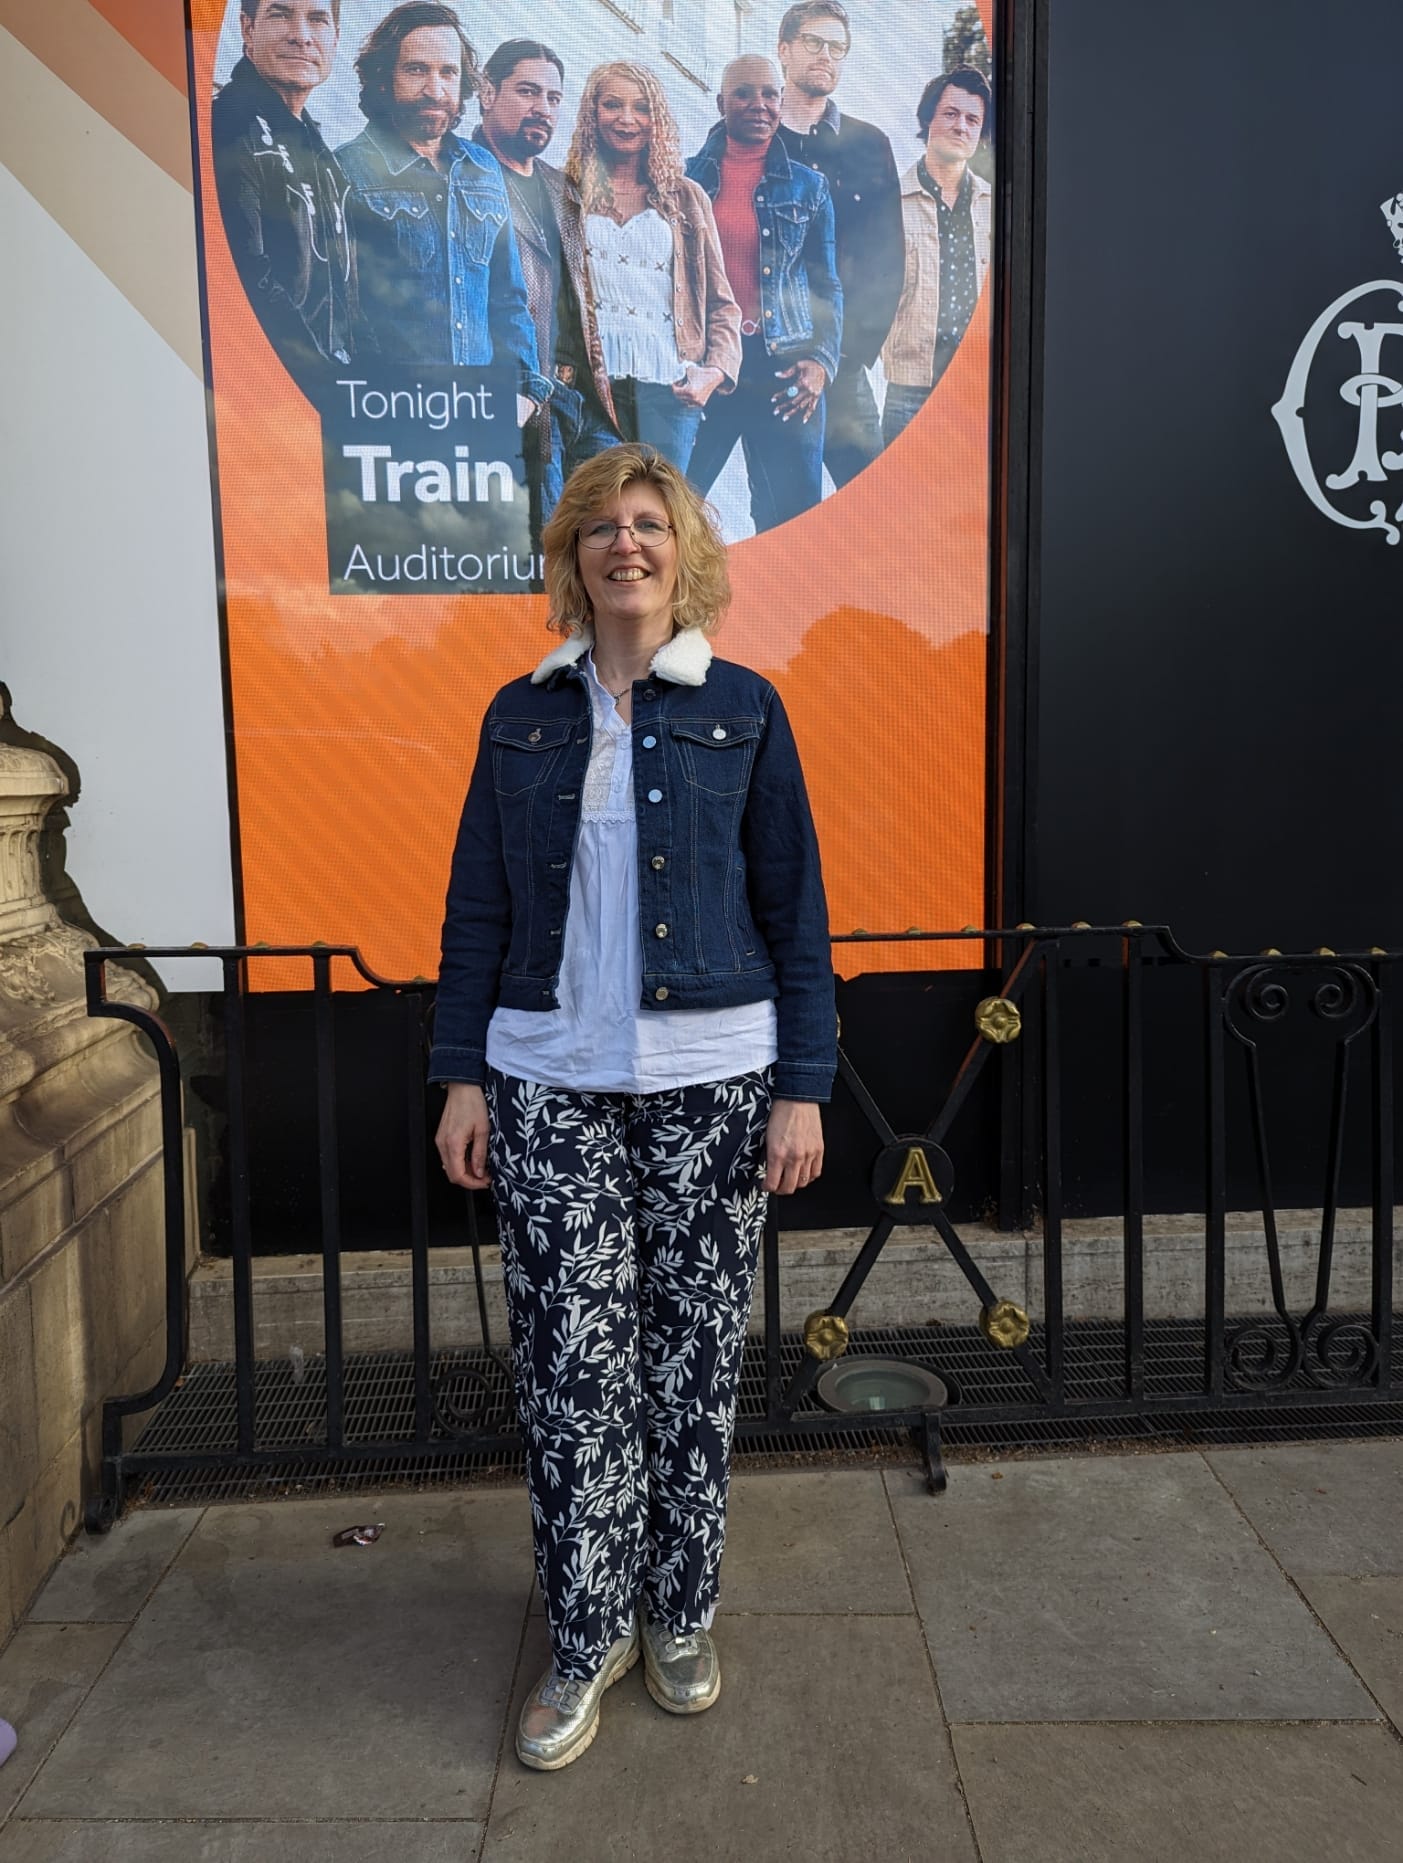 Me at the Train concert in London wearing my Jasmine Harman Collection trousers.